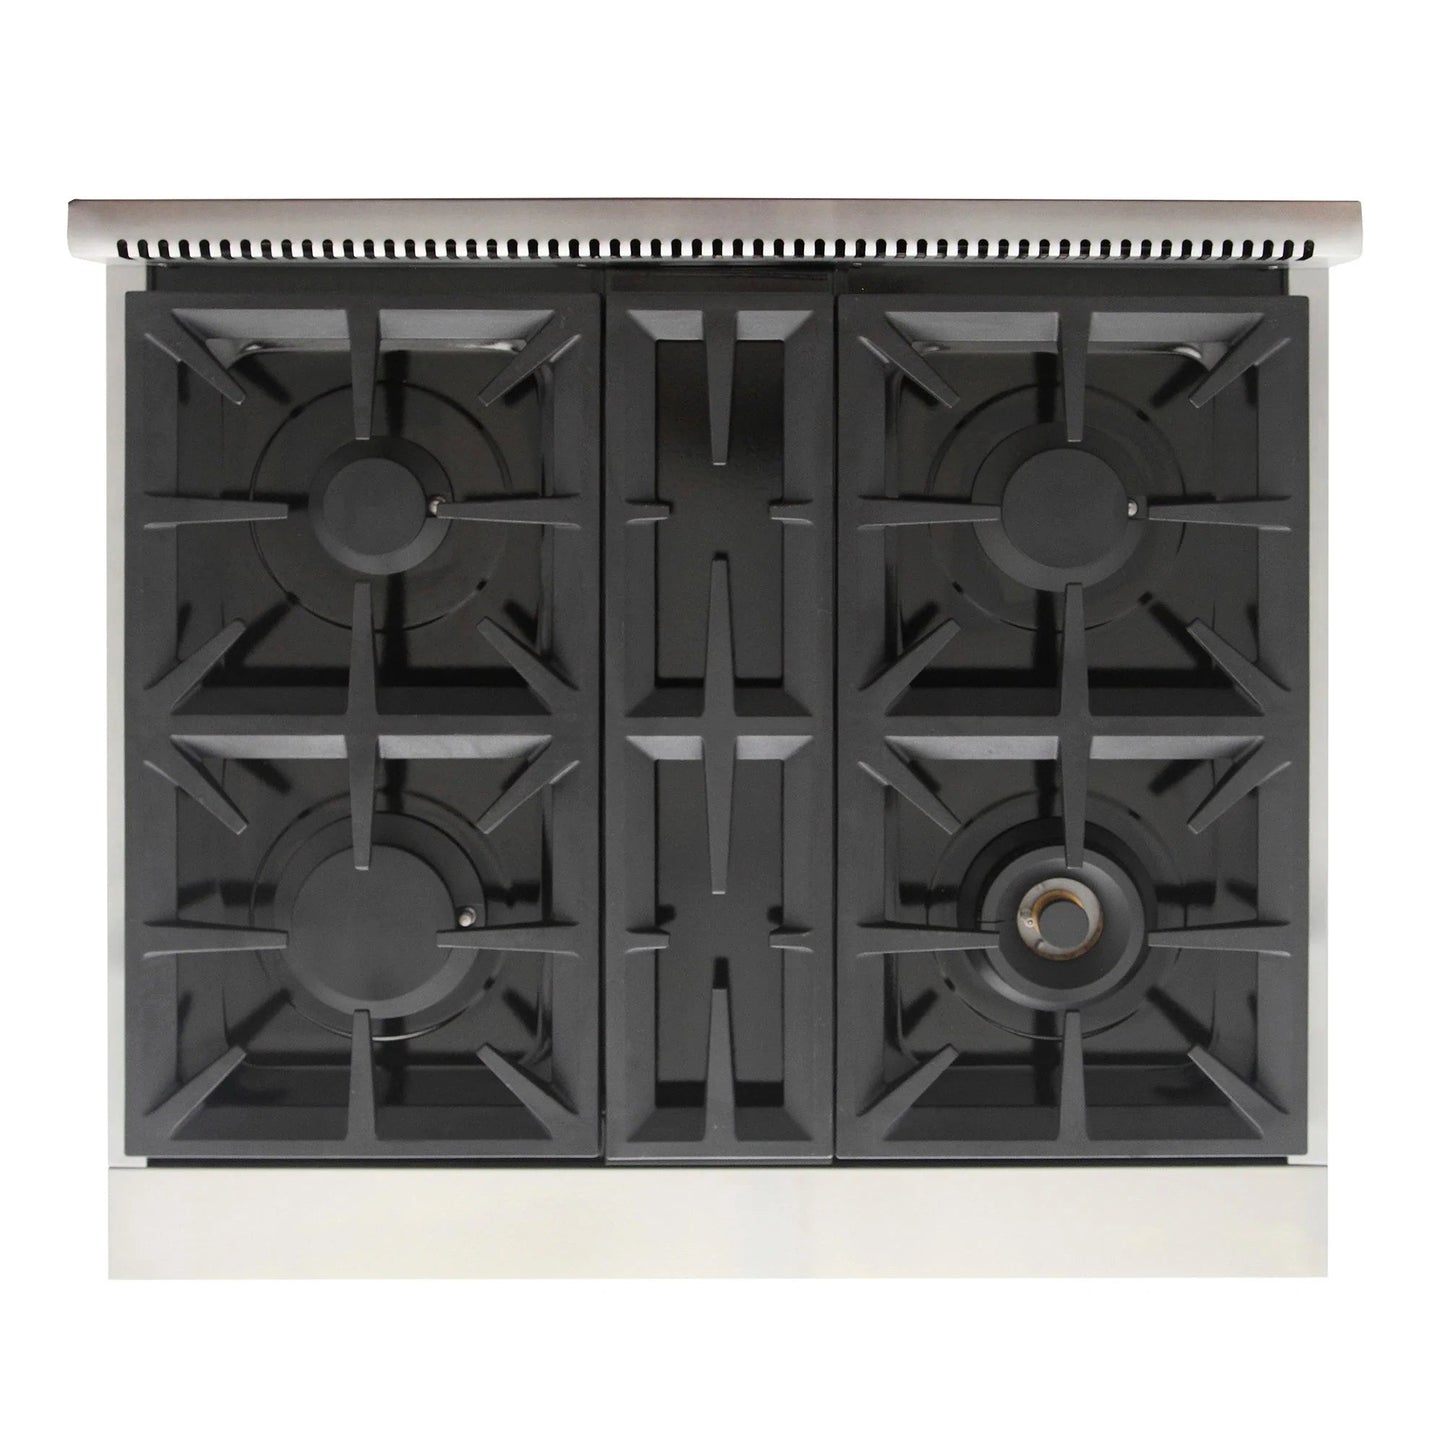 Kucht KFX Series 30" Freestanding Natural Gas Range With 4 Burners and Tuxedo Black Knobs